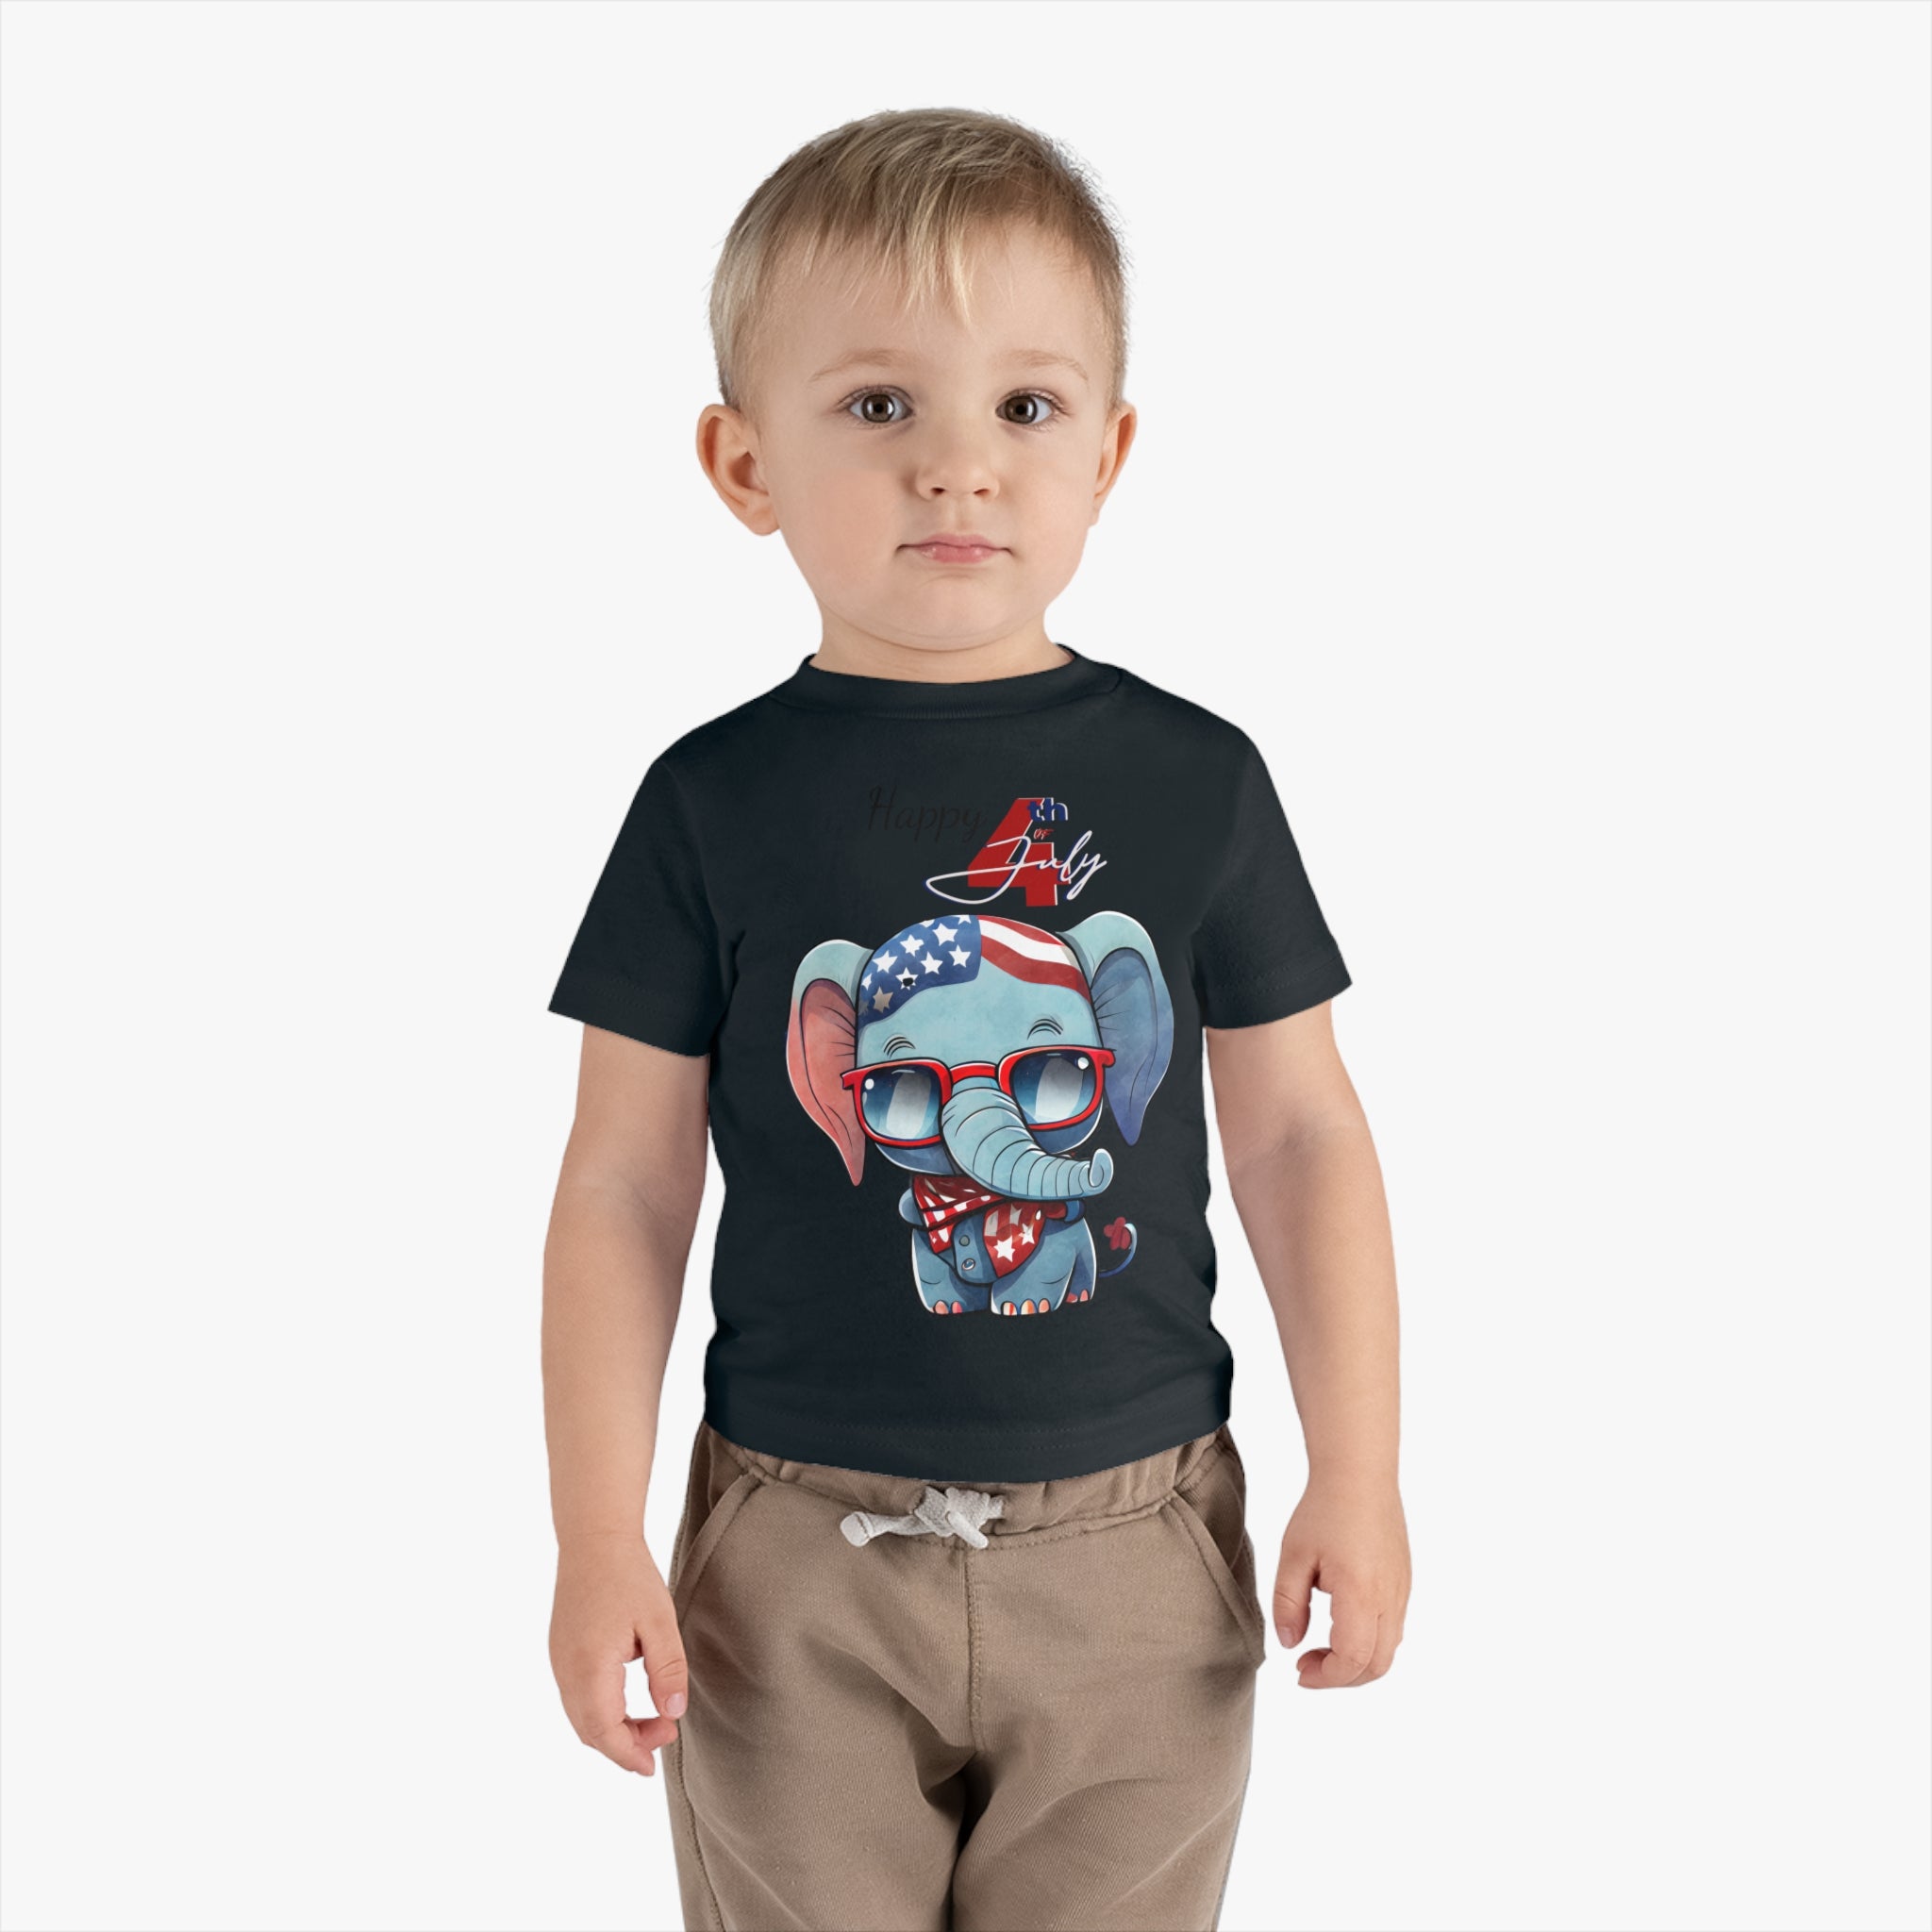 Happy 4th of July Elephant design Infant Shirt, Baby Tee, Infant Tee